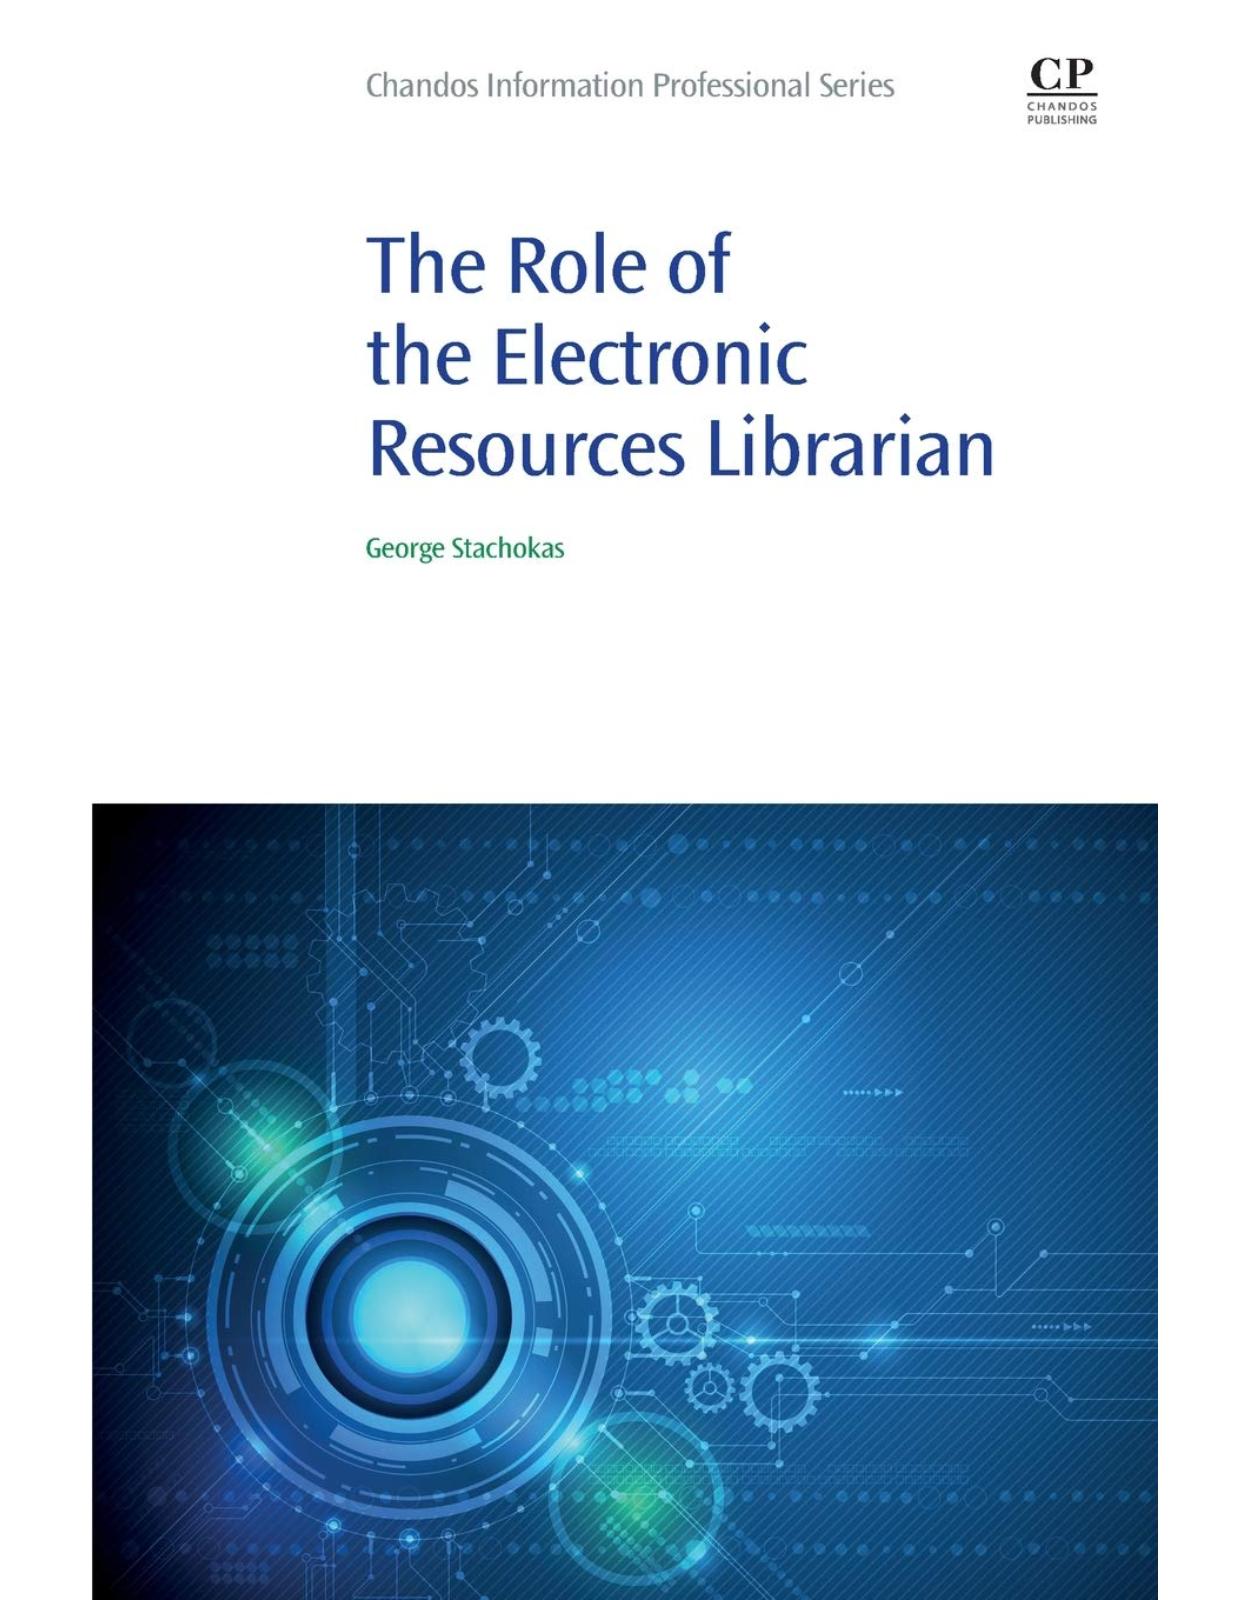 The Role of the Electronic Resources Librarian (Chandos Information Professional Series)